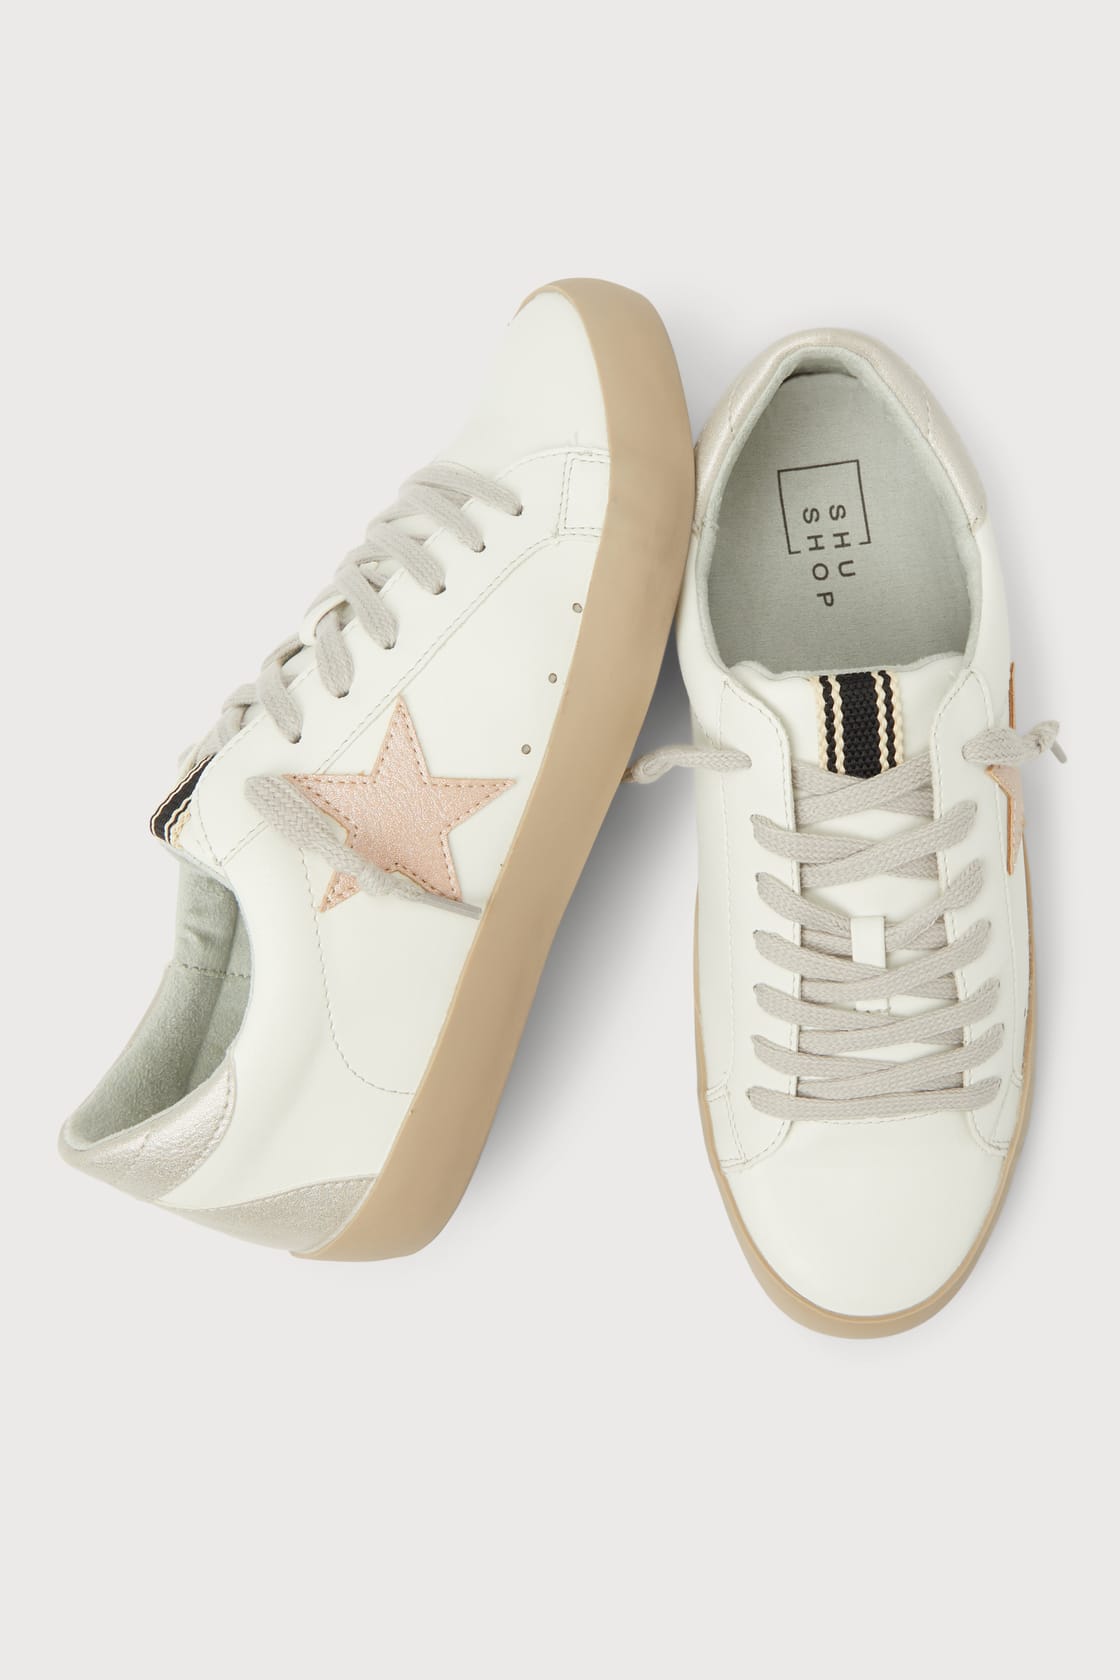 golden goose dupes - lulus Paula Light Pink Color Block Lace-Up Sneakers